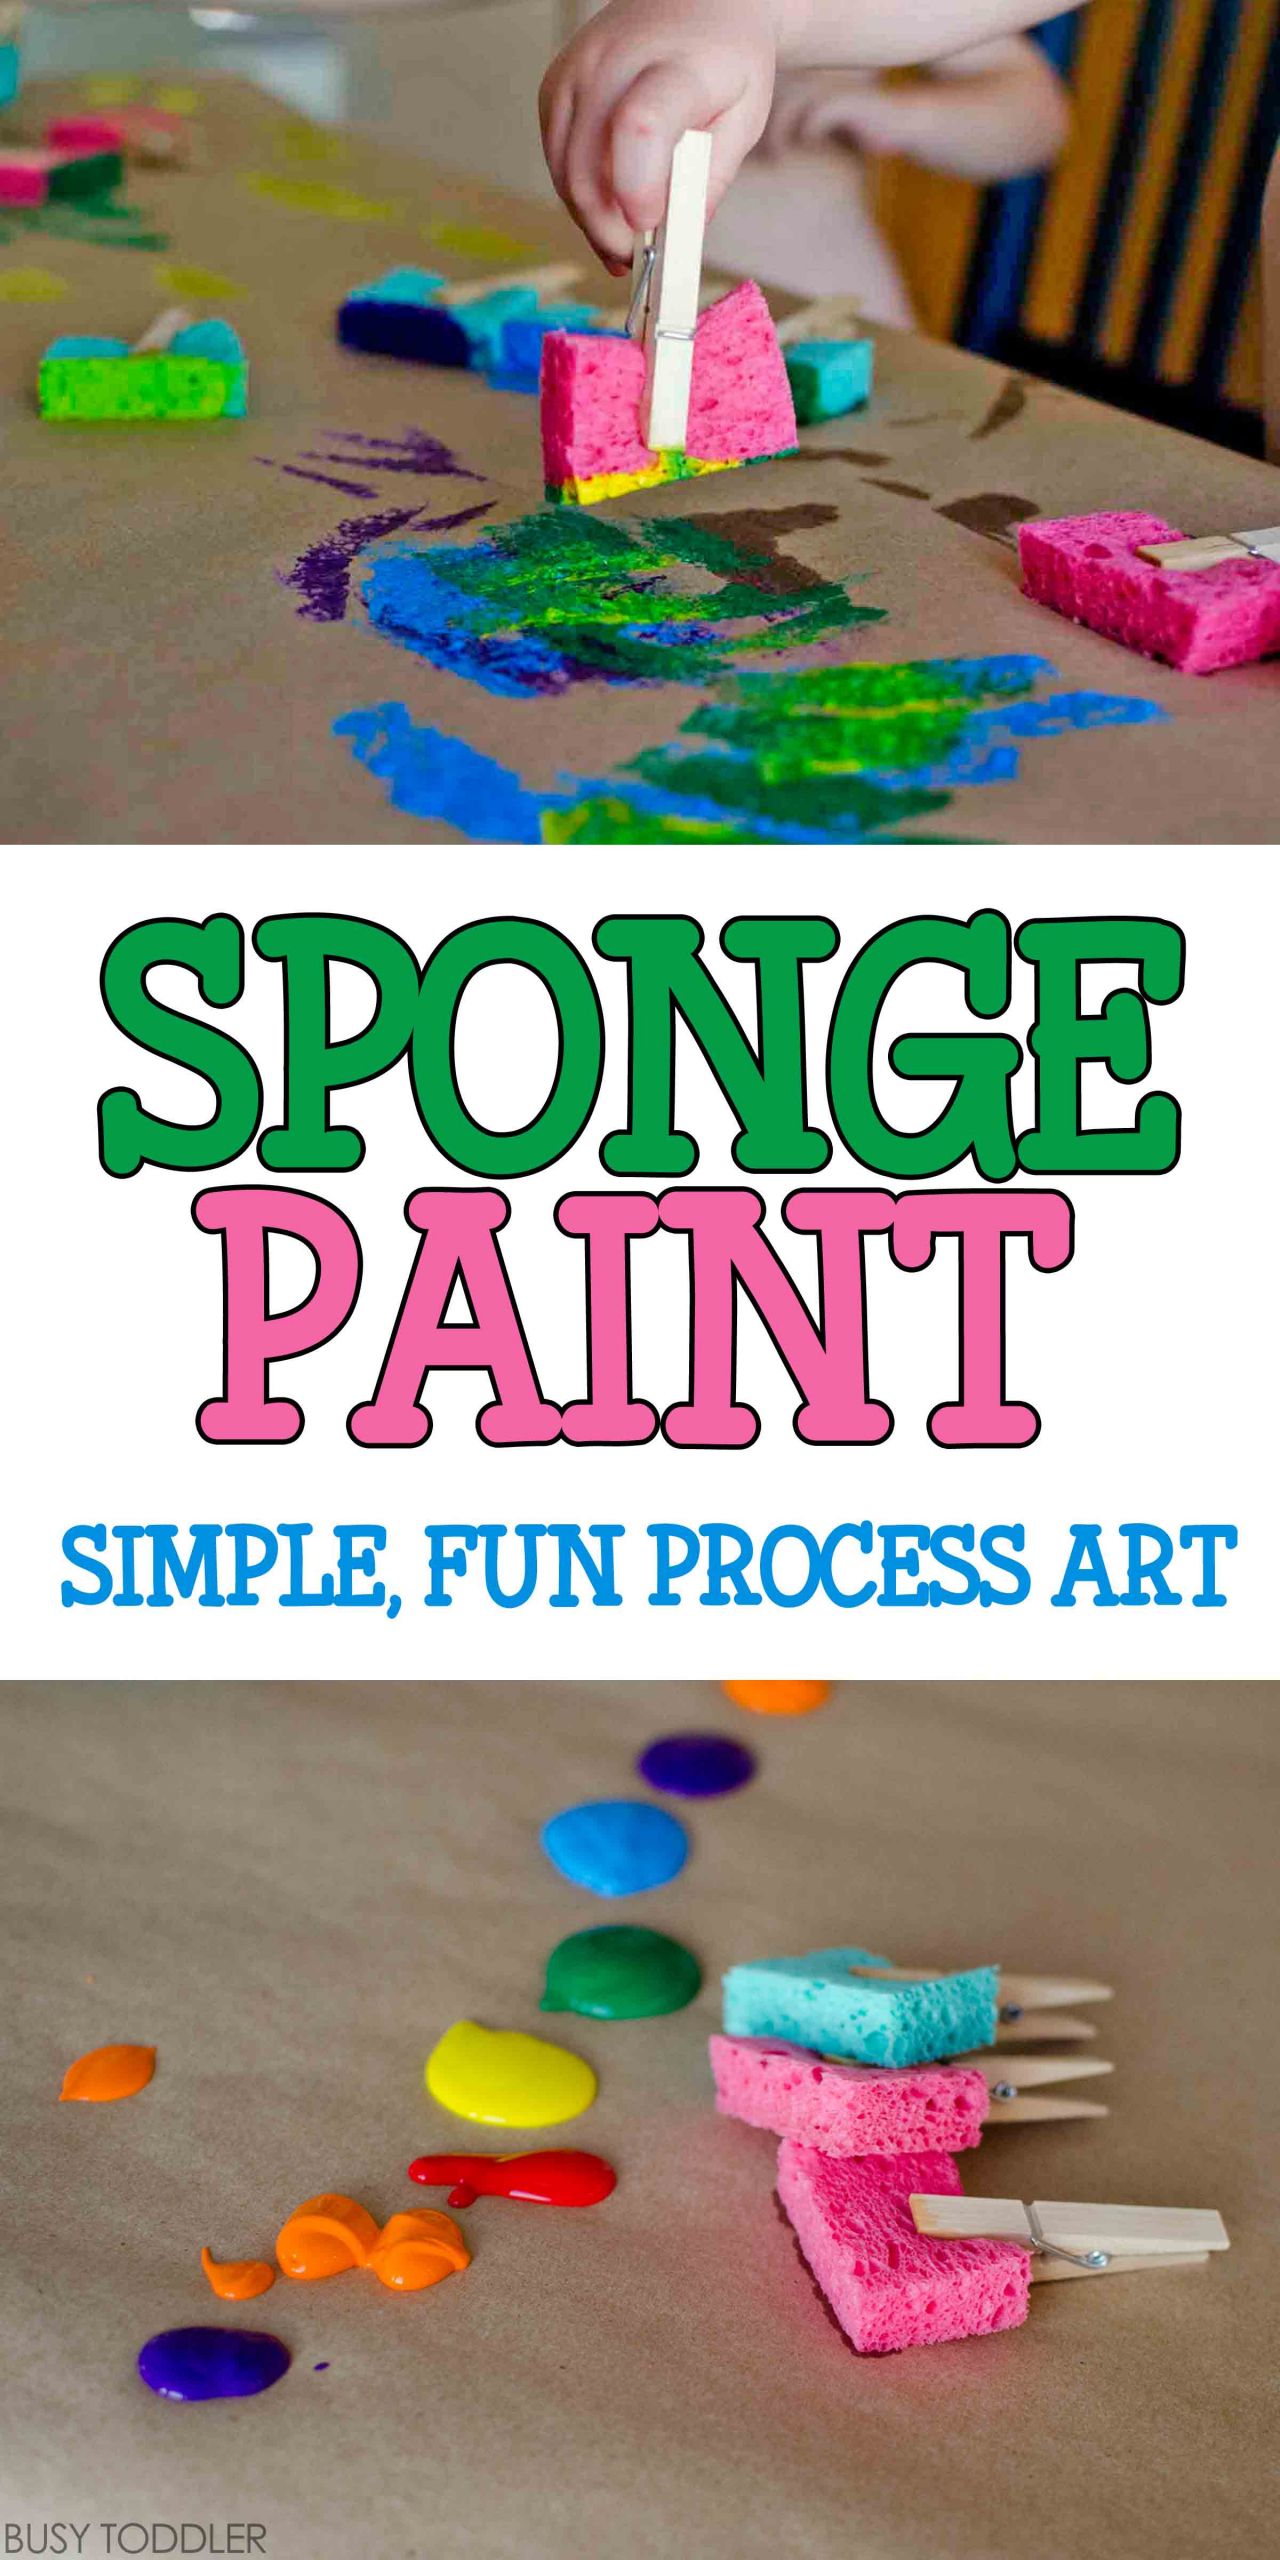 Simple Art Projects For Toddlers
 Sponge Painting Process Art Busy Toddler